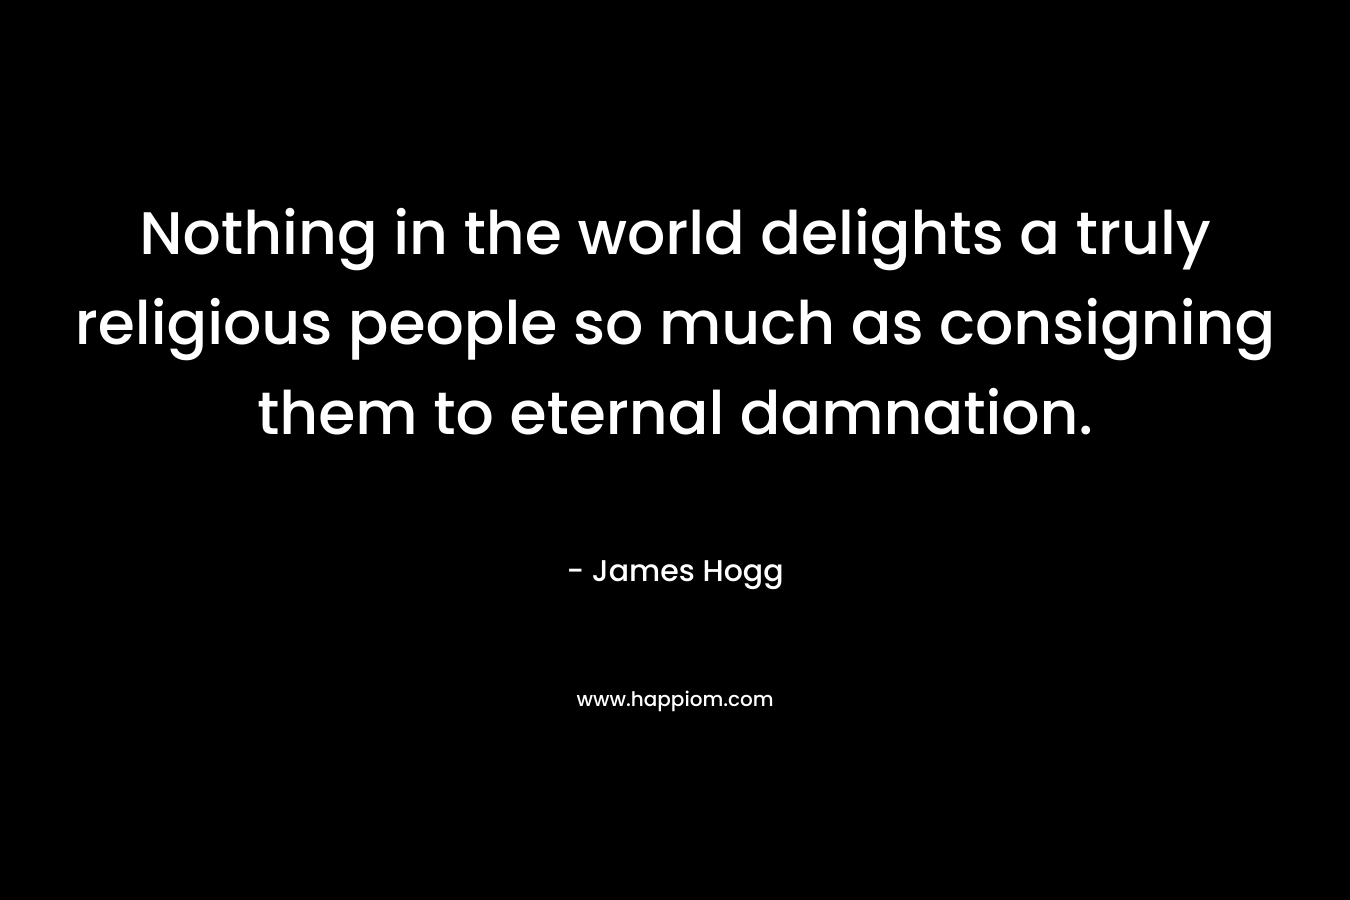 Nothing in the world delights a truly religious people so much as consigning them to eternal damnation. – James Hogg